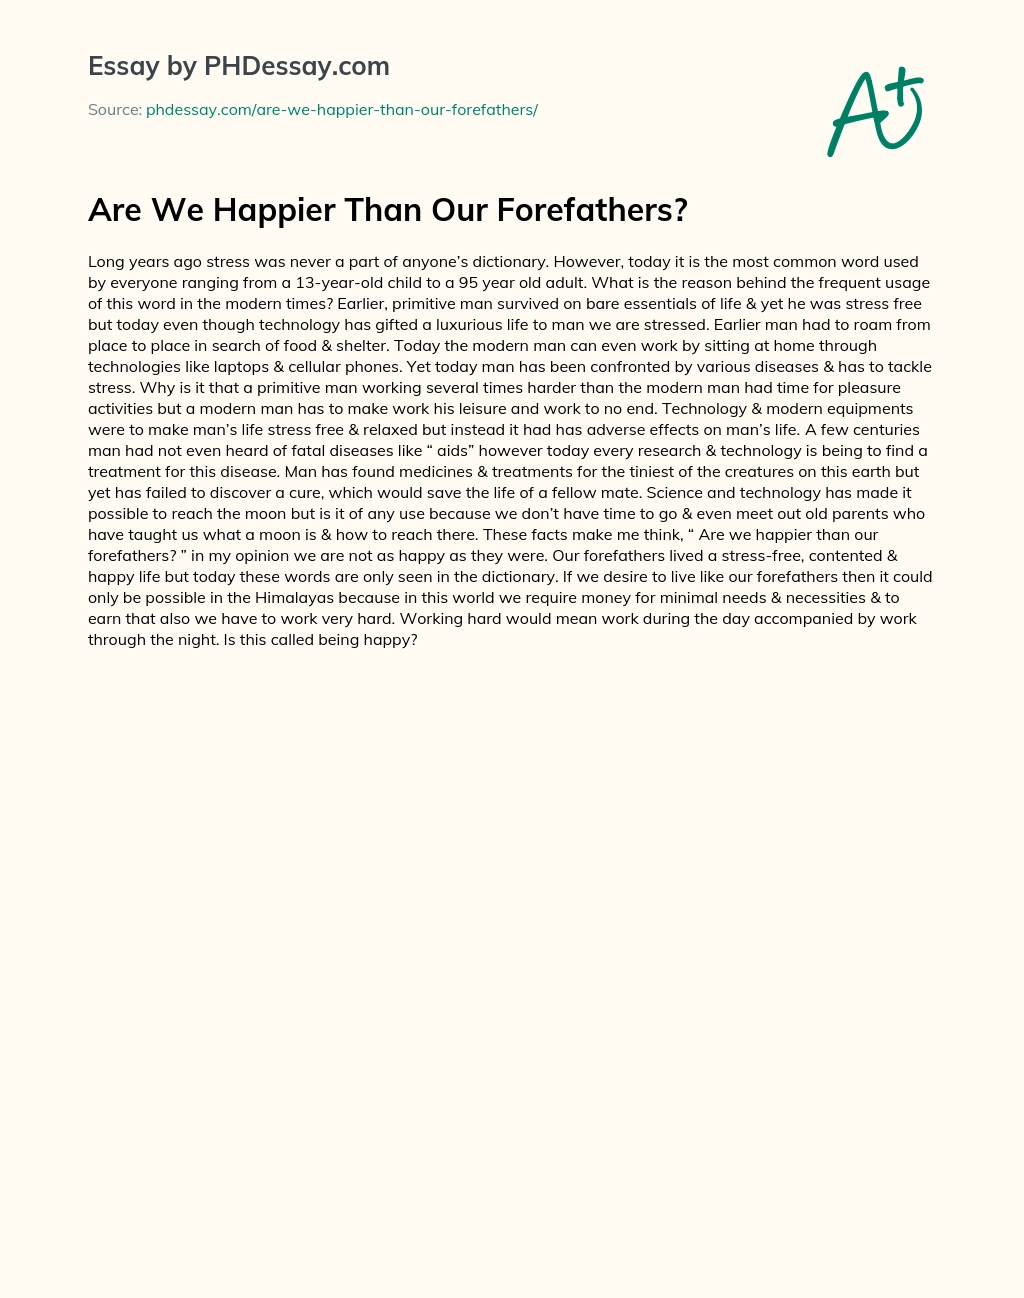 Are We Happier Than Our Forefathers? essay